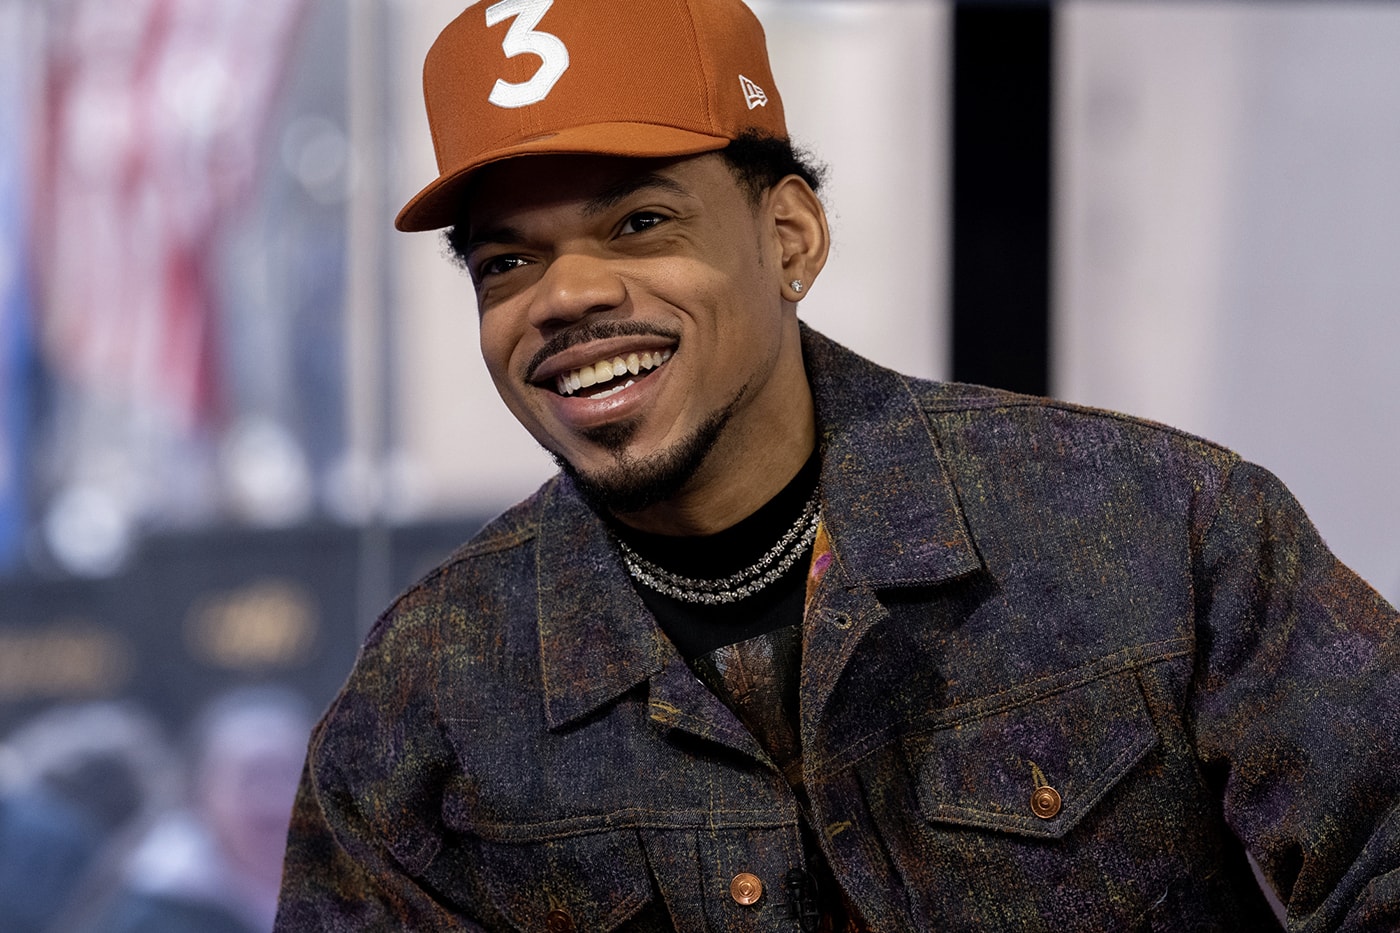 Chance The Rapper Star Line Gallery Update one of my proudest projects